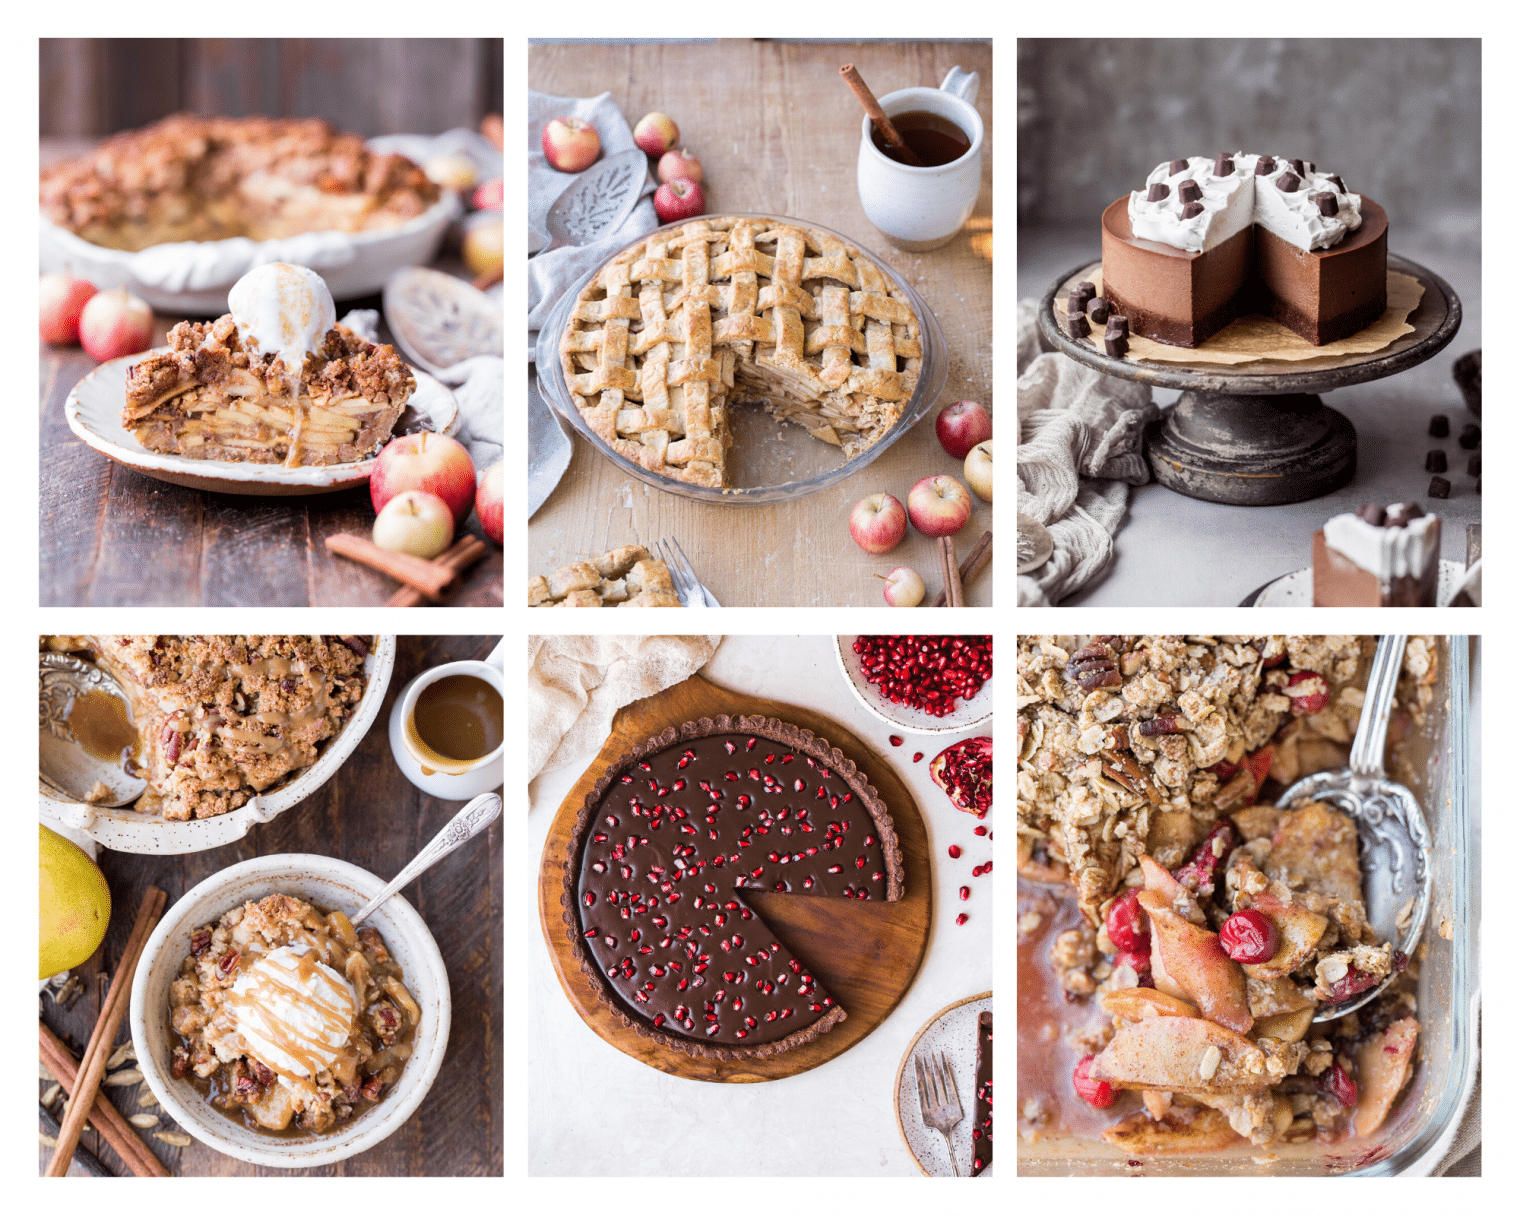 These 20 Gluten-Free Vegan Thanksgiving Desserts will be a hit with the whole family! These delicious holiday dessert recipes are my family's holiday favorites.